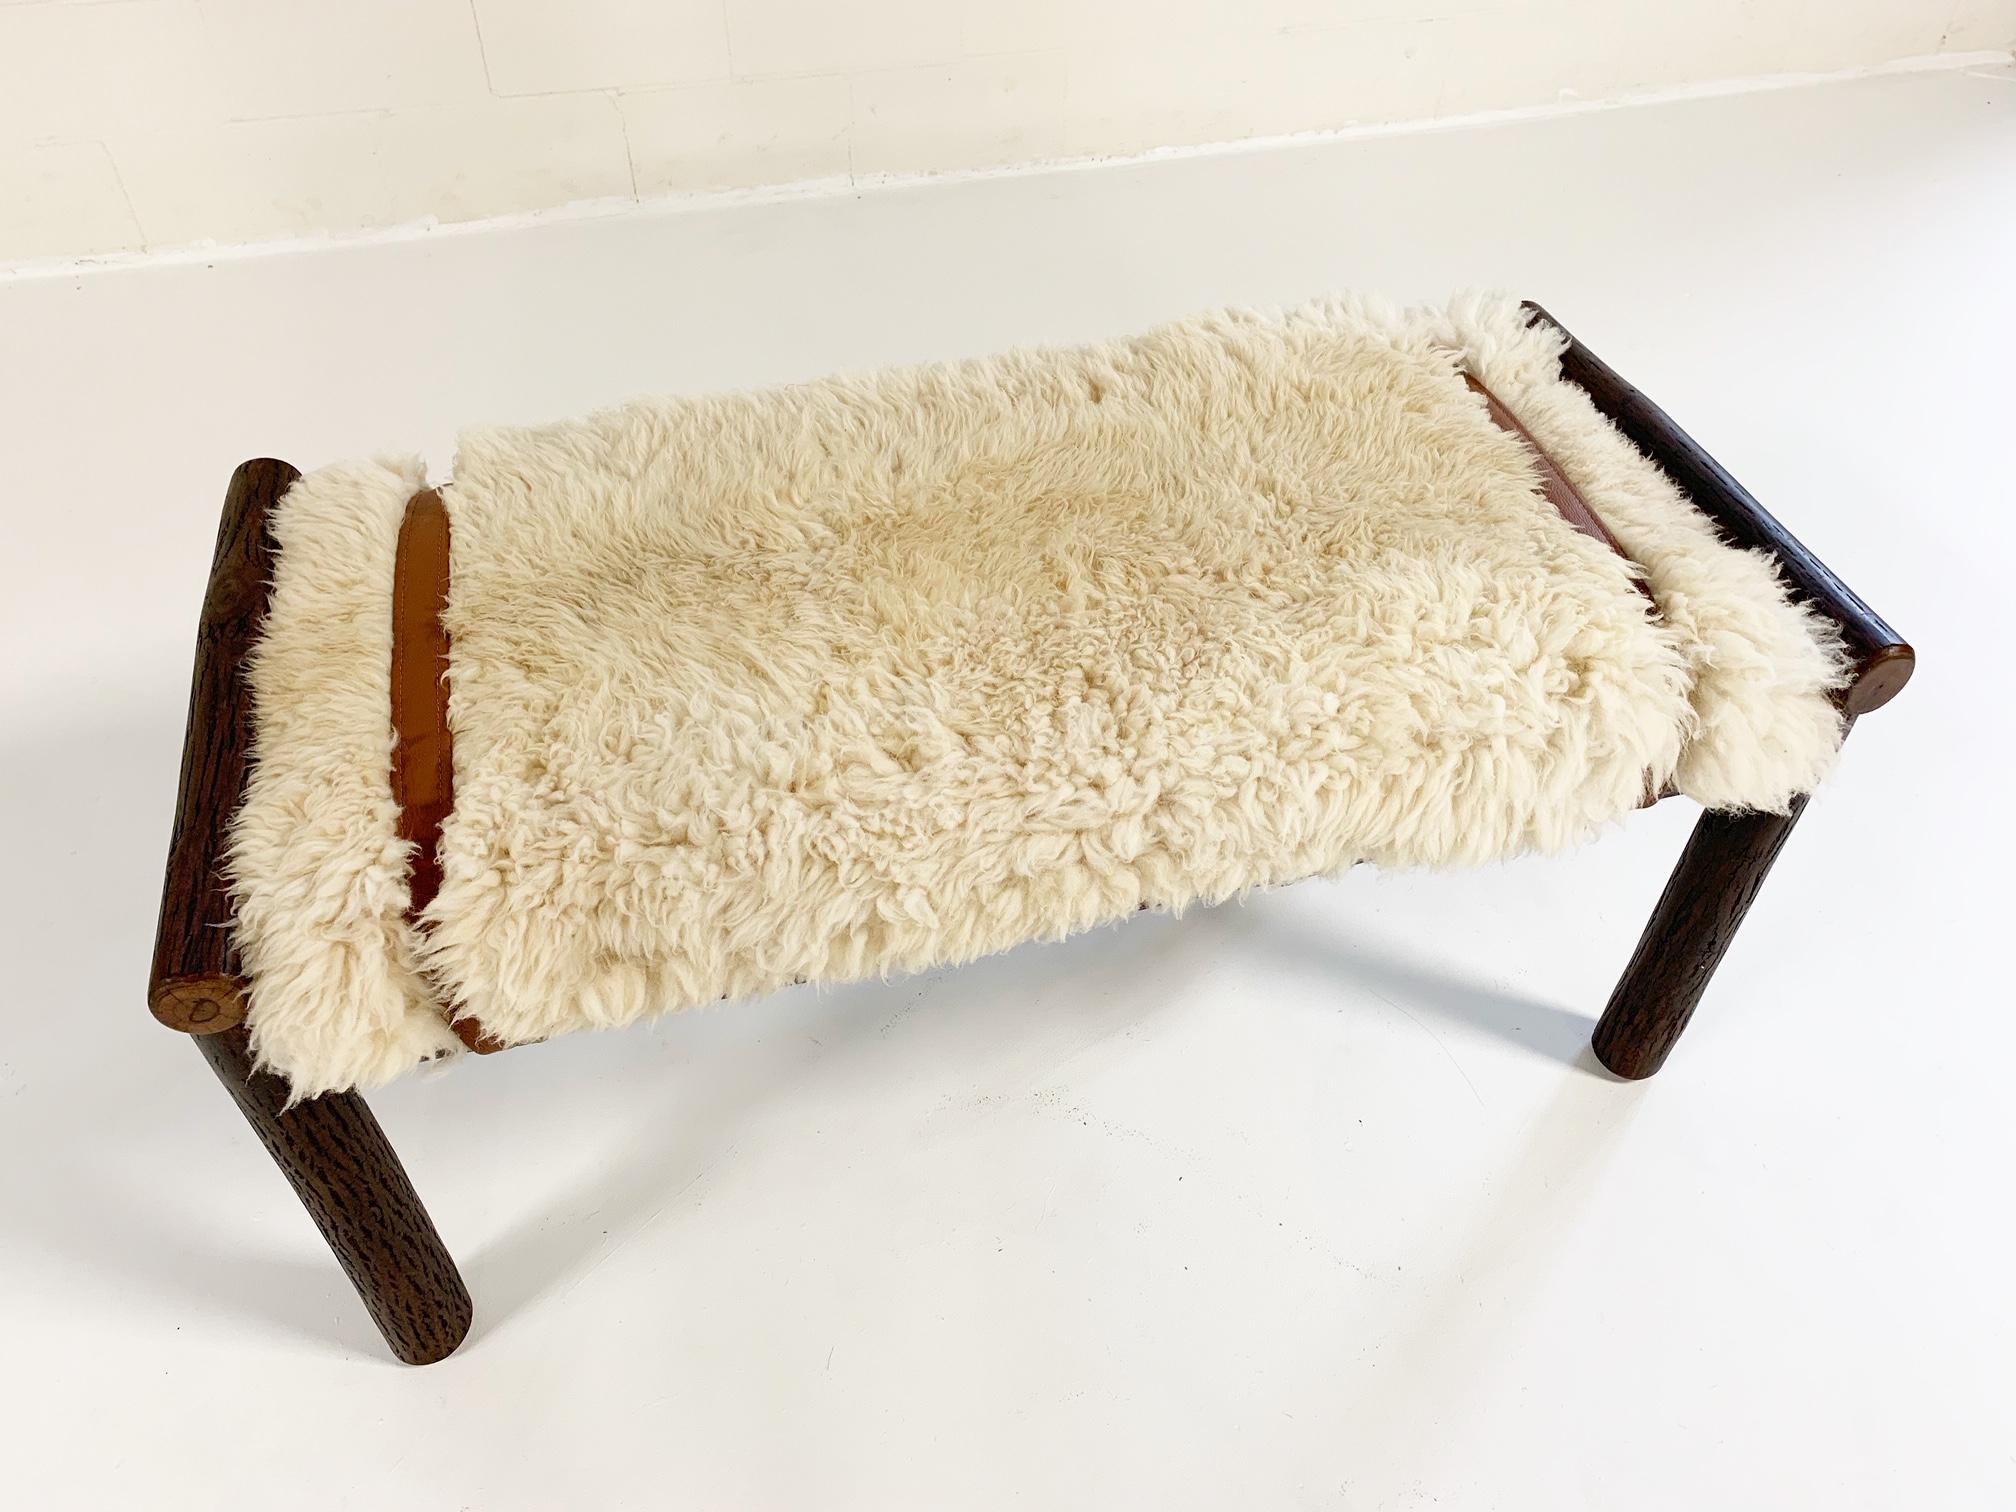 Forsyth X Old Hickory butte bench with custom California sheepskin cushion and Loro Piana buffalo leather

When the Old Hickory Furniture Company asked us to collaborate on a few of their pieces, we jumped at the opportunity. Based in central